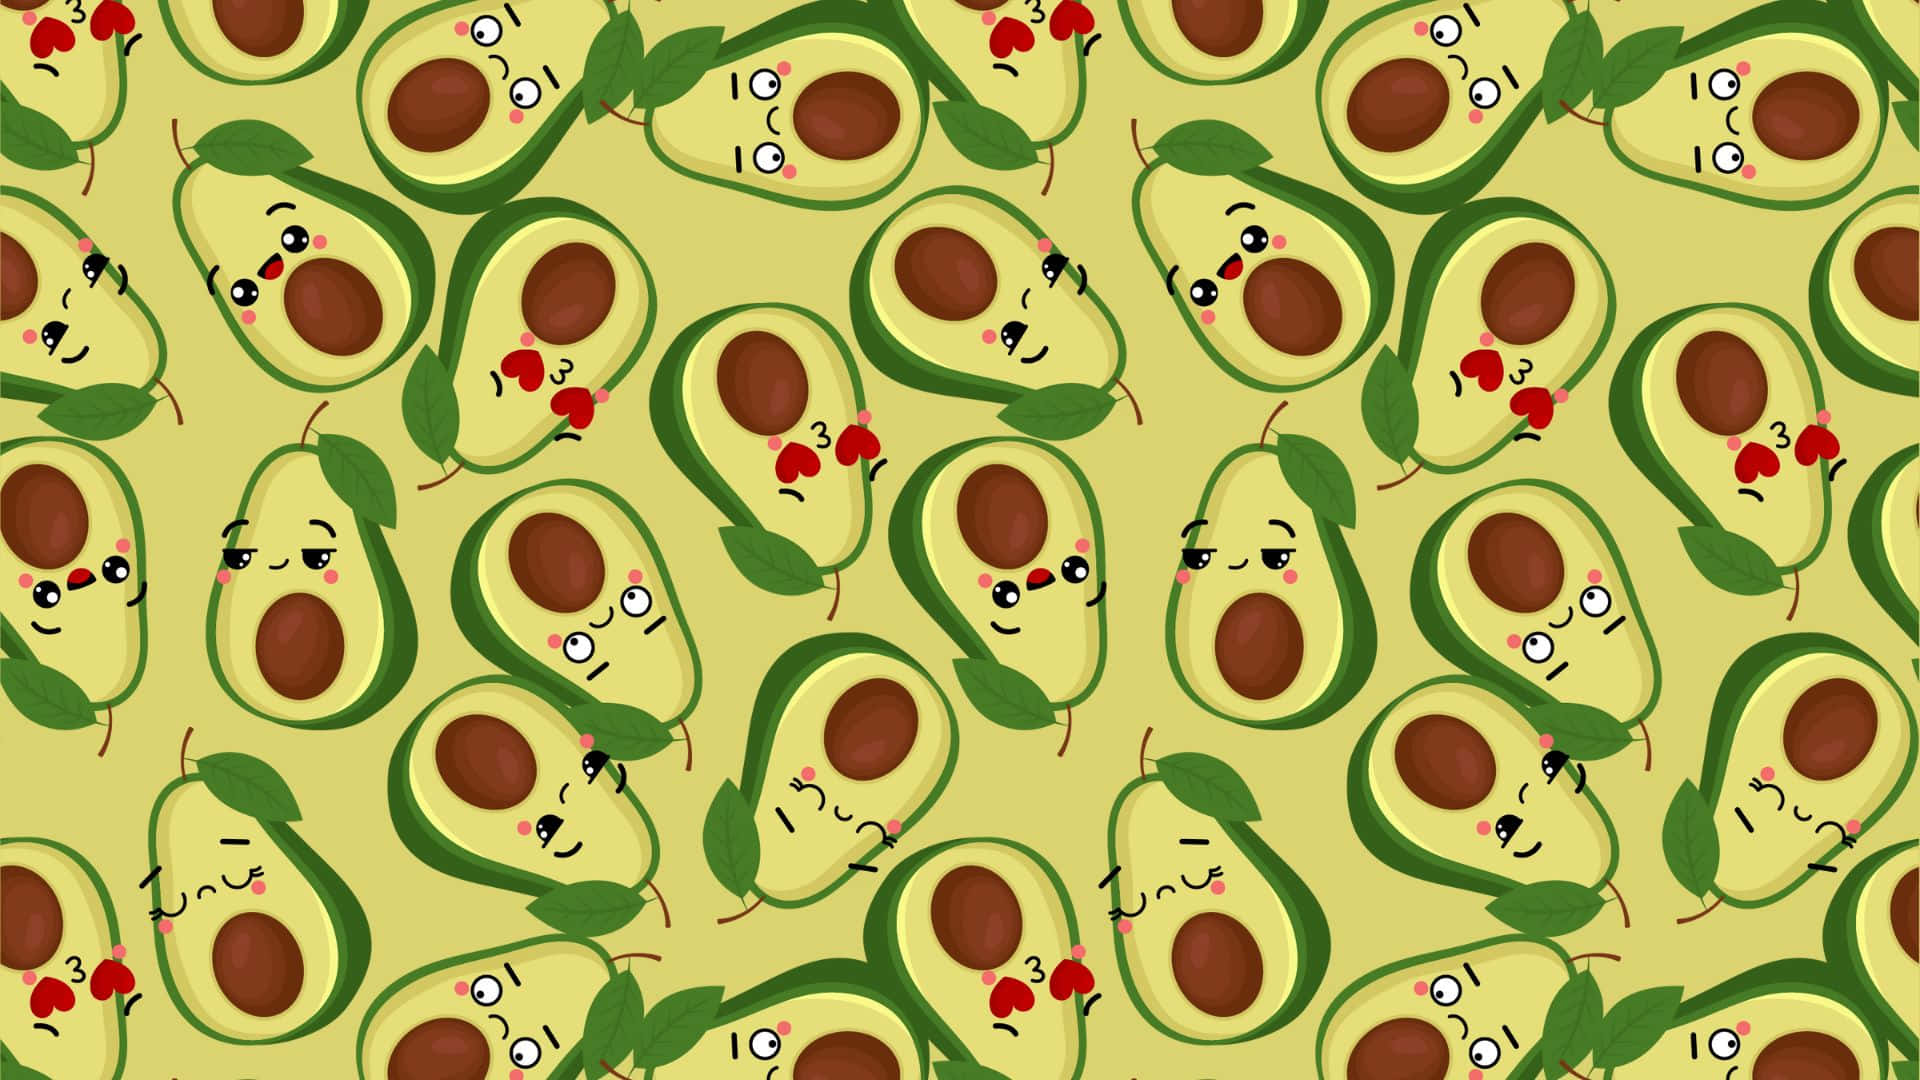 Adorable Avocado Friends on a Playful Background